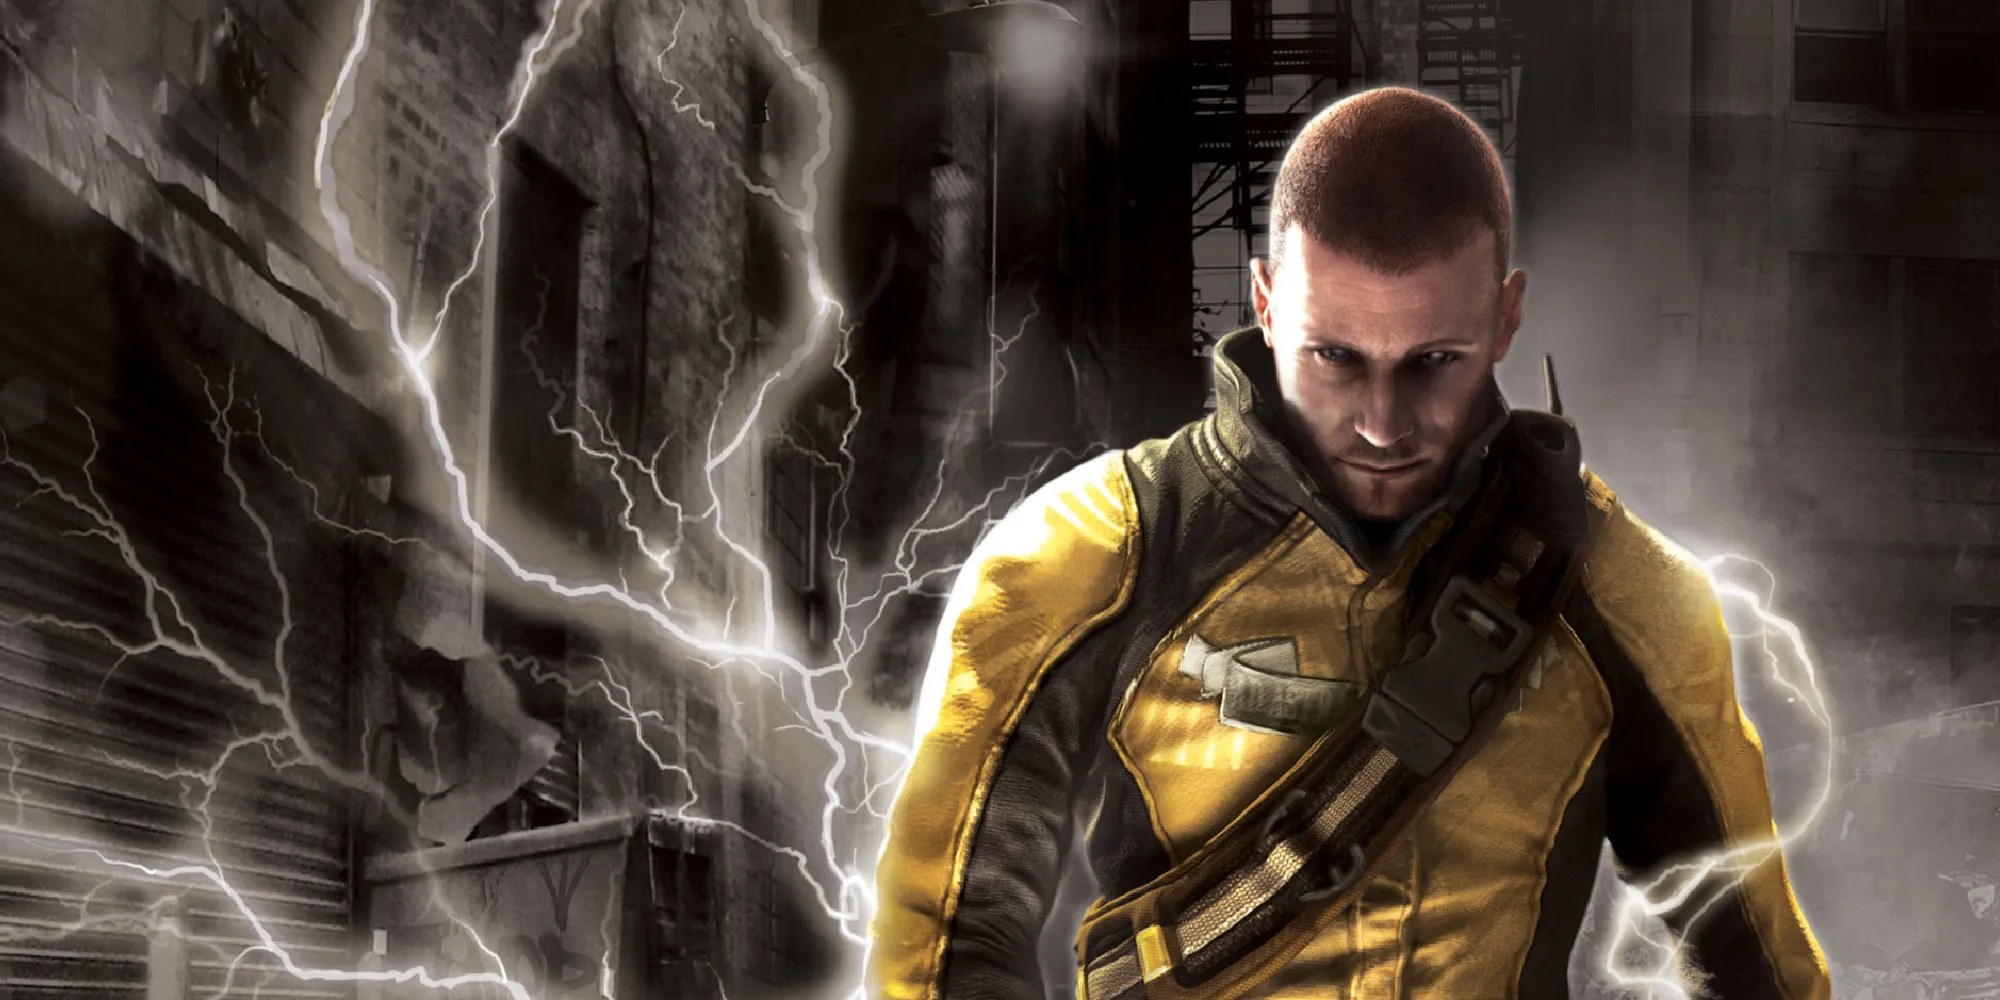 The main protagonist faces the viewer, electricity crackling behind him on an urban street. 